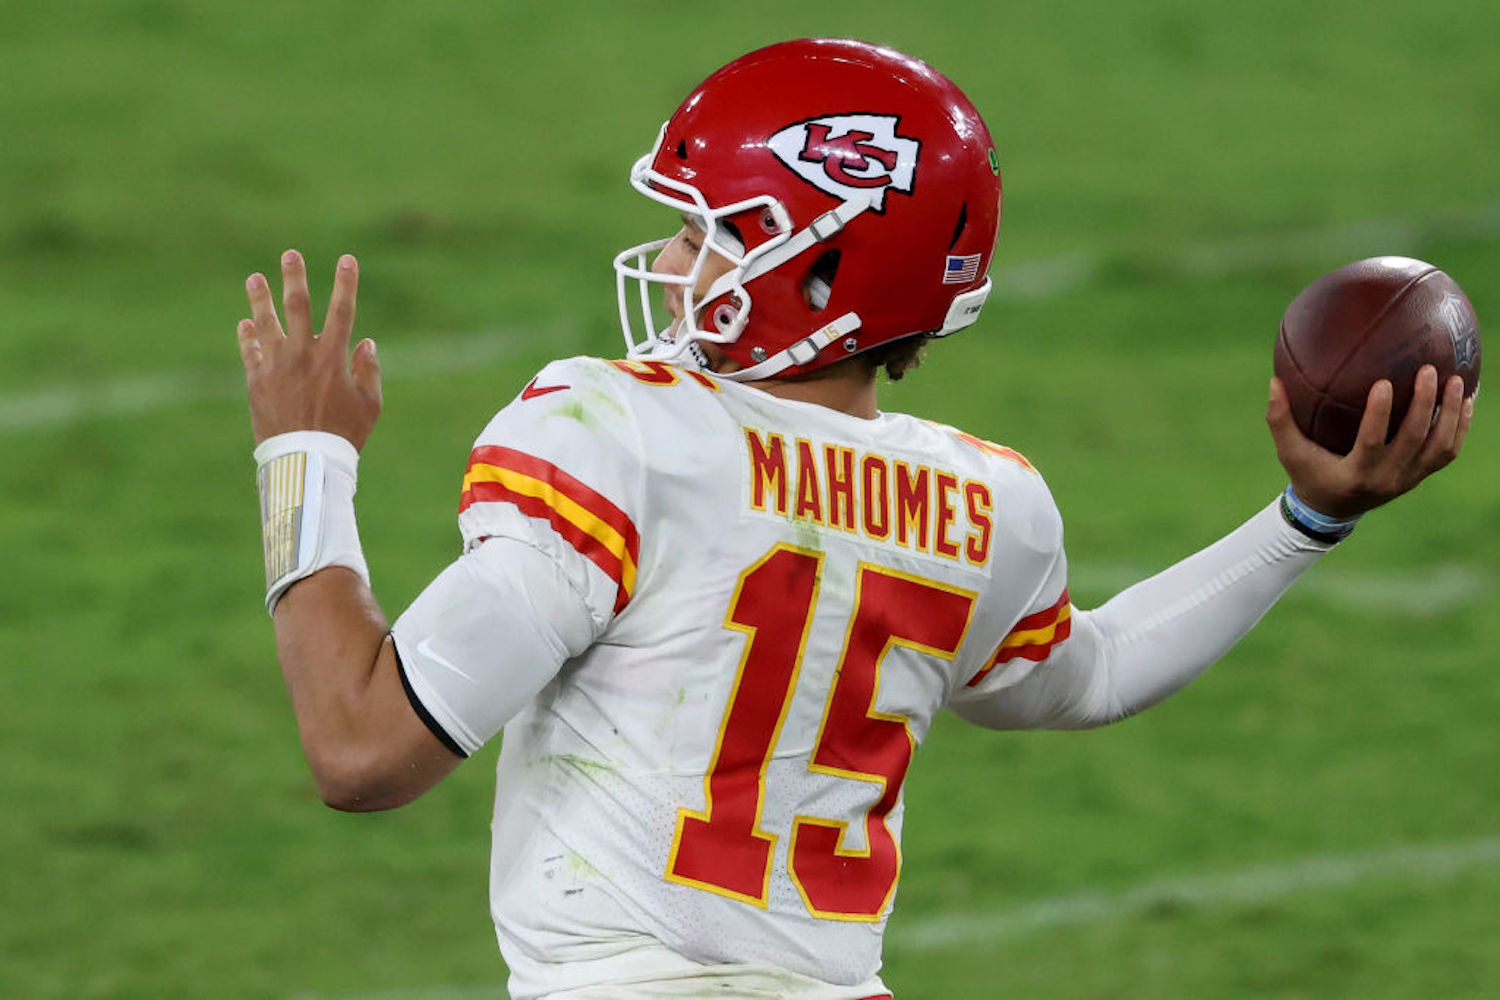 Patrick Mahomes has one of the best arms in the current NFL, but have you ever wondered how far he can throw a football? Well, now we know.